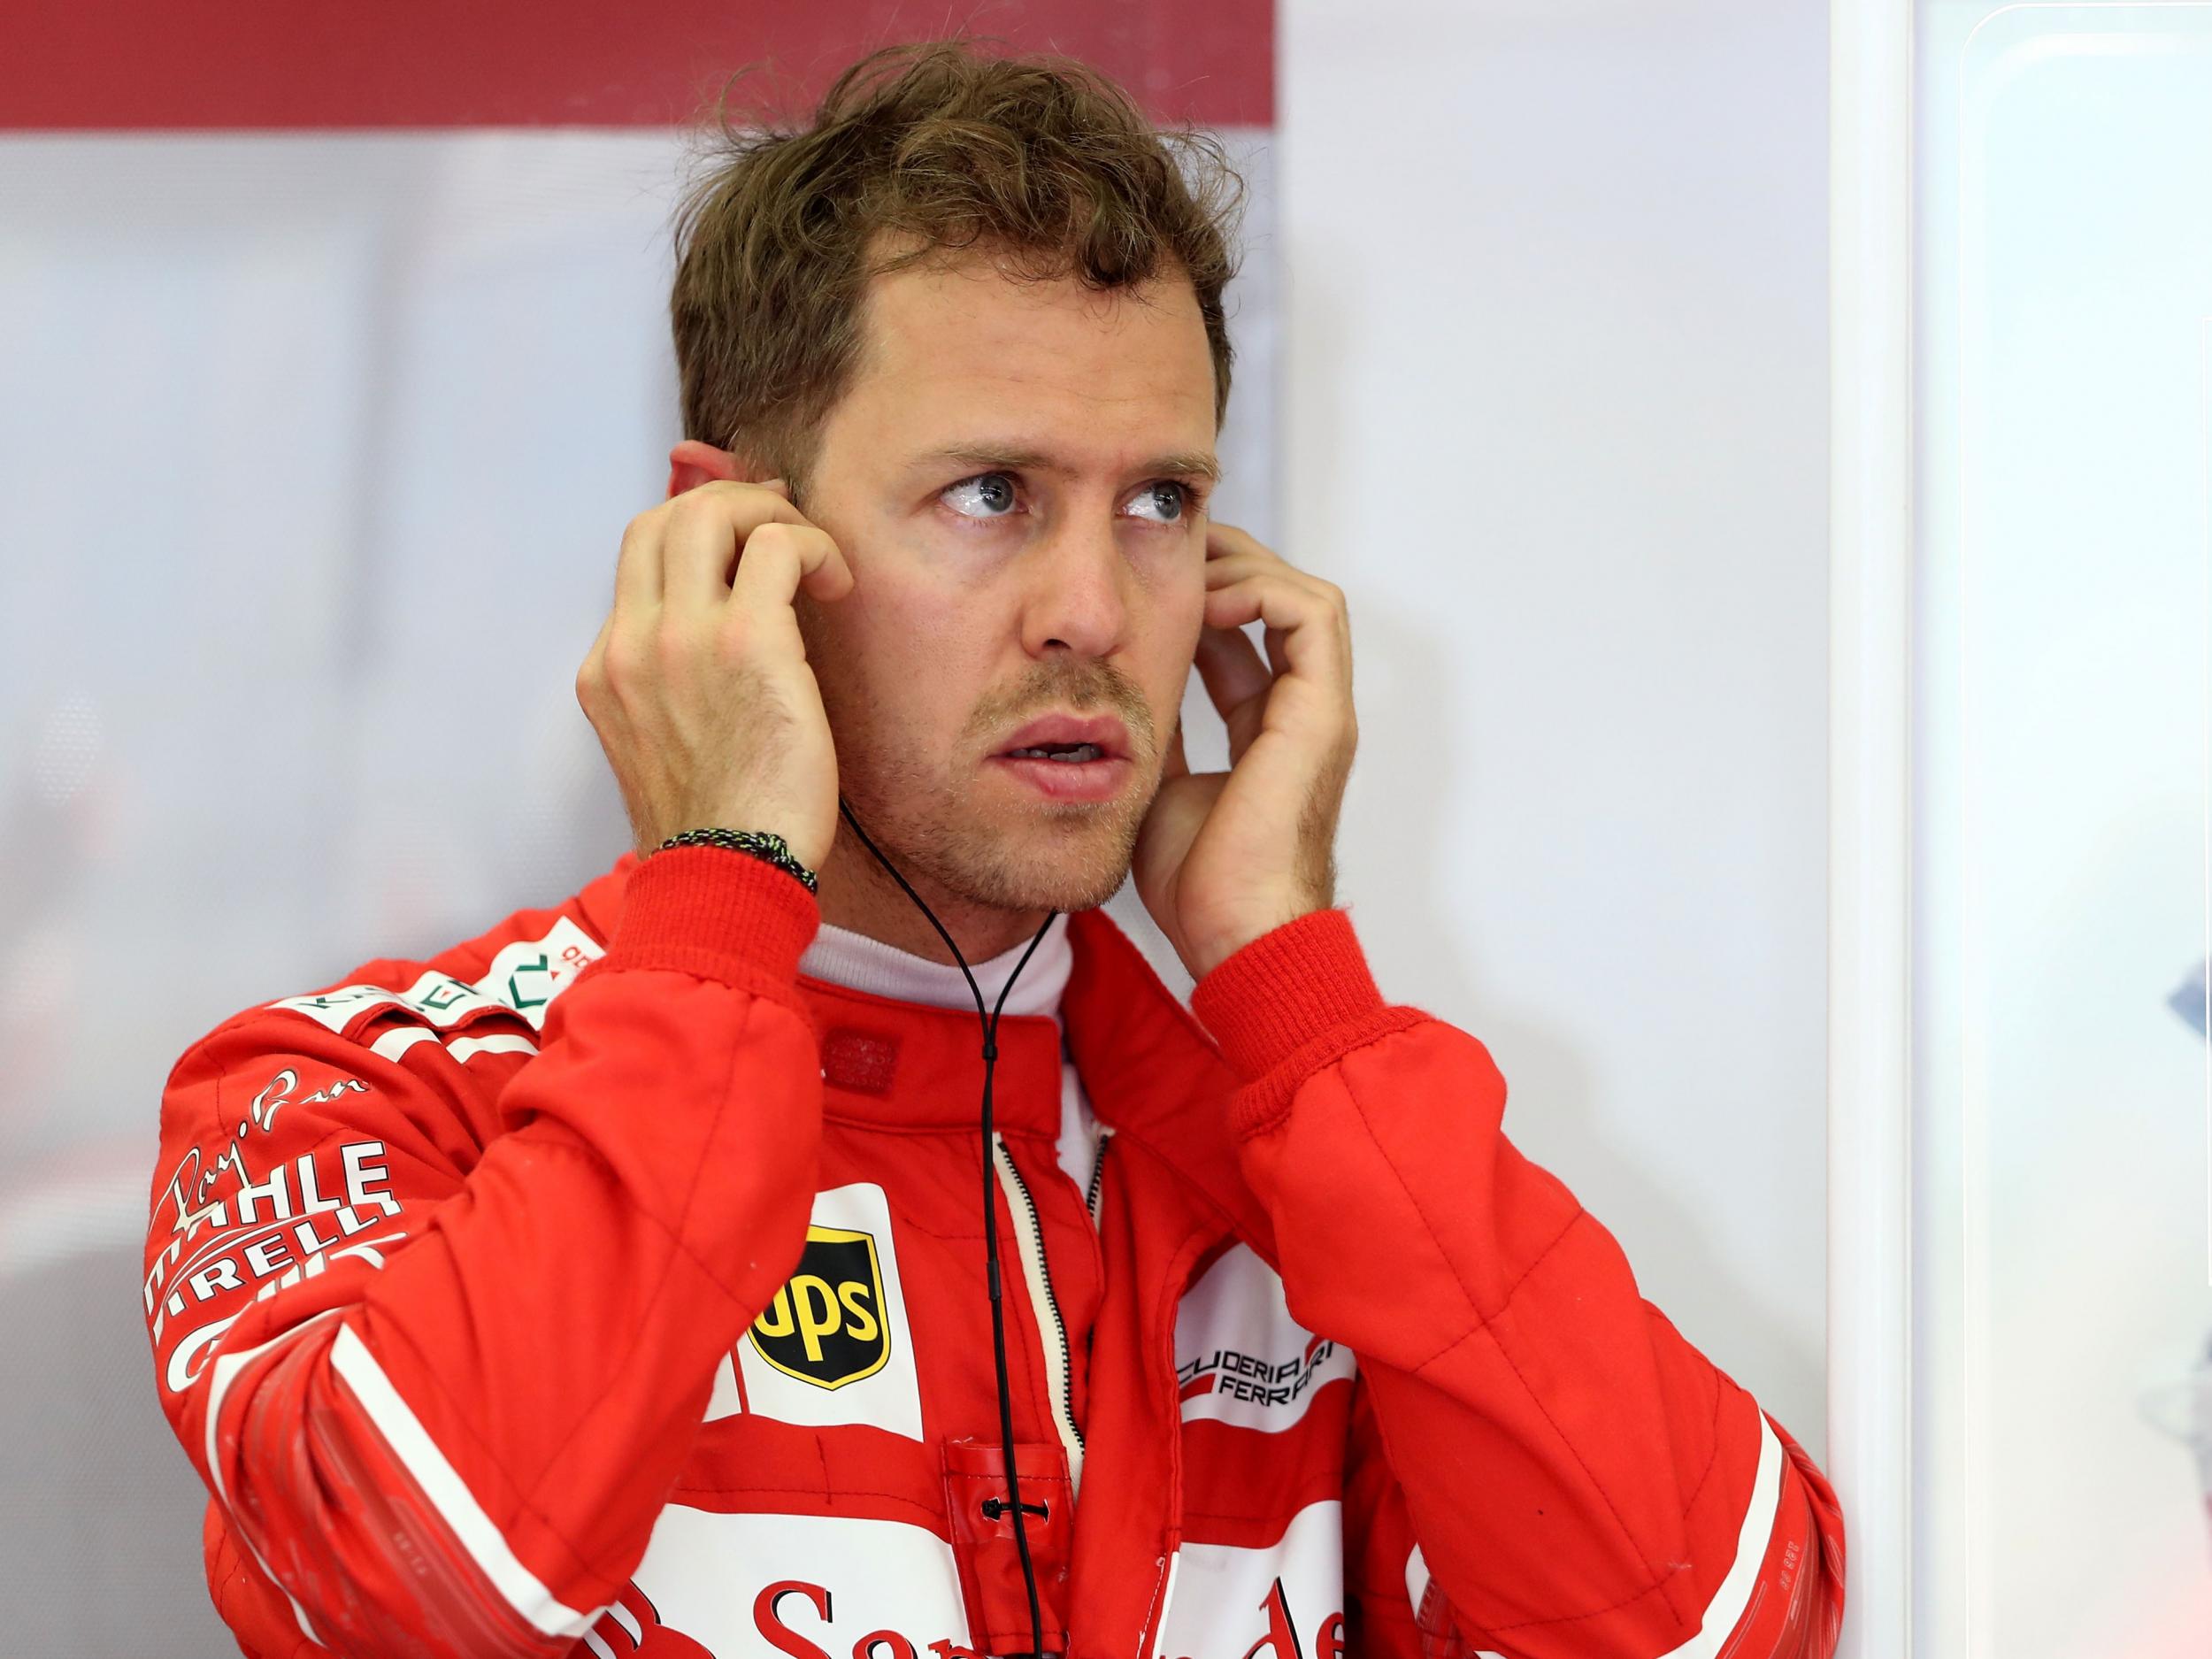 Vettel excelled in both practices